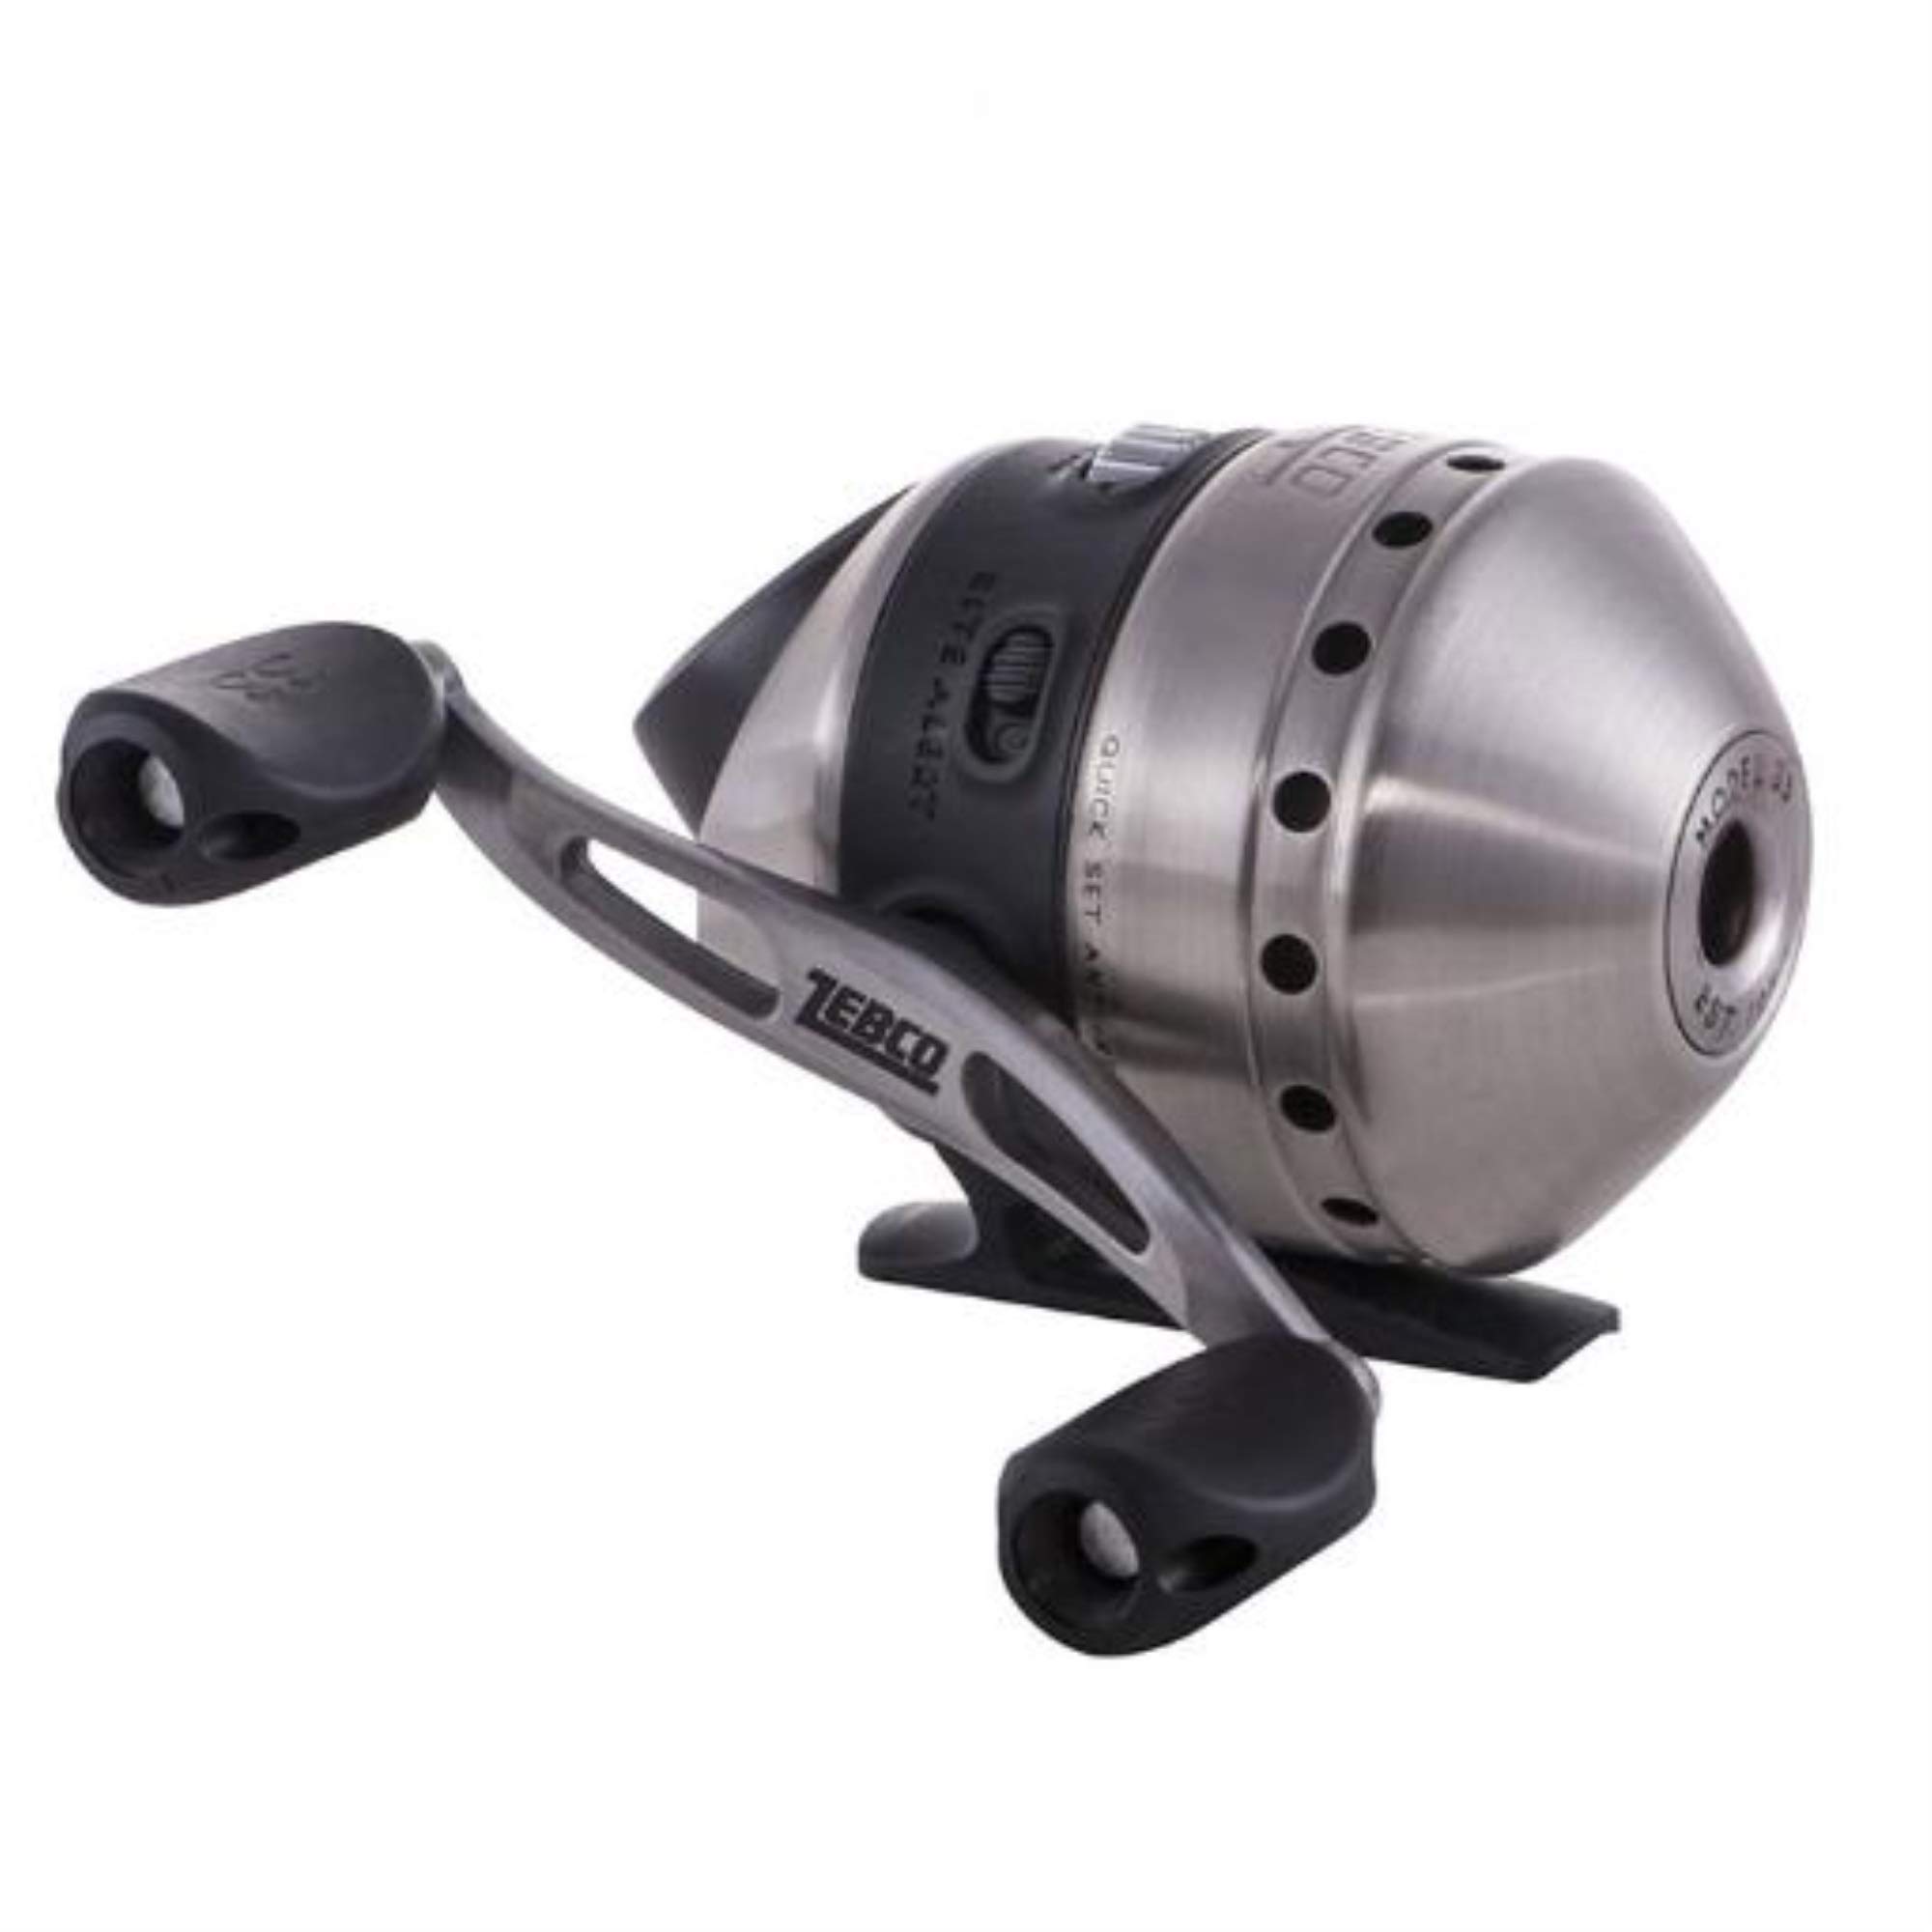 Zebco New Style 33 Push Button Reel - Fishing Reel - Easy to use- New